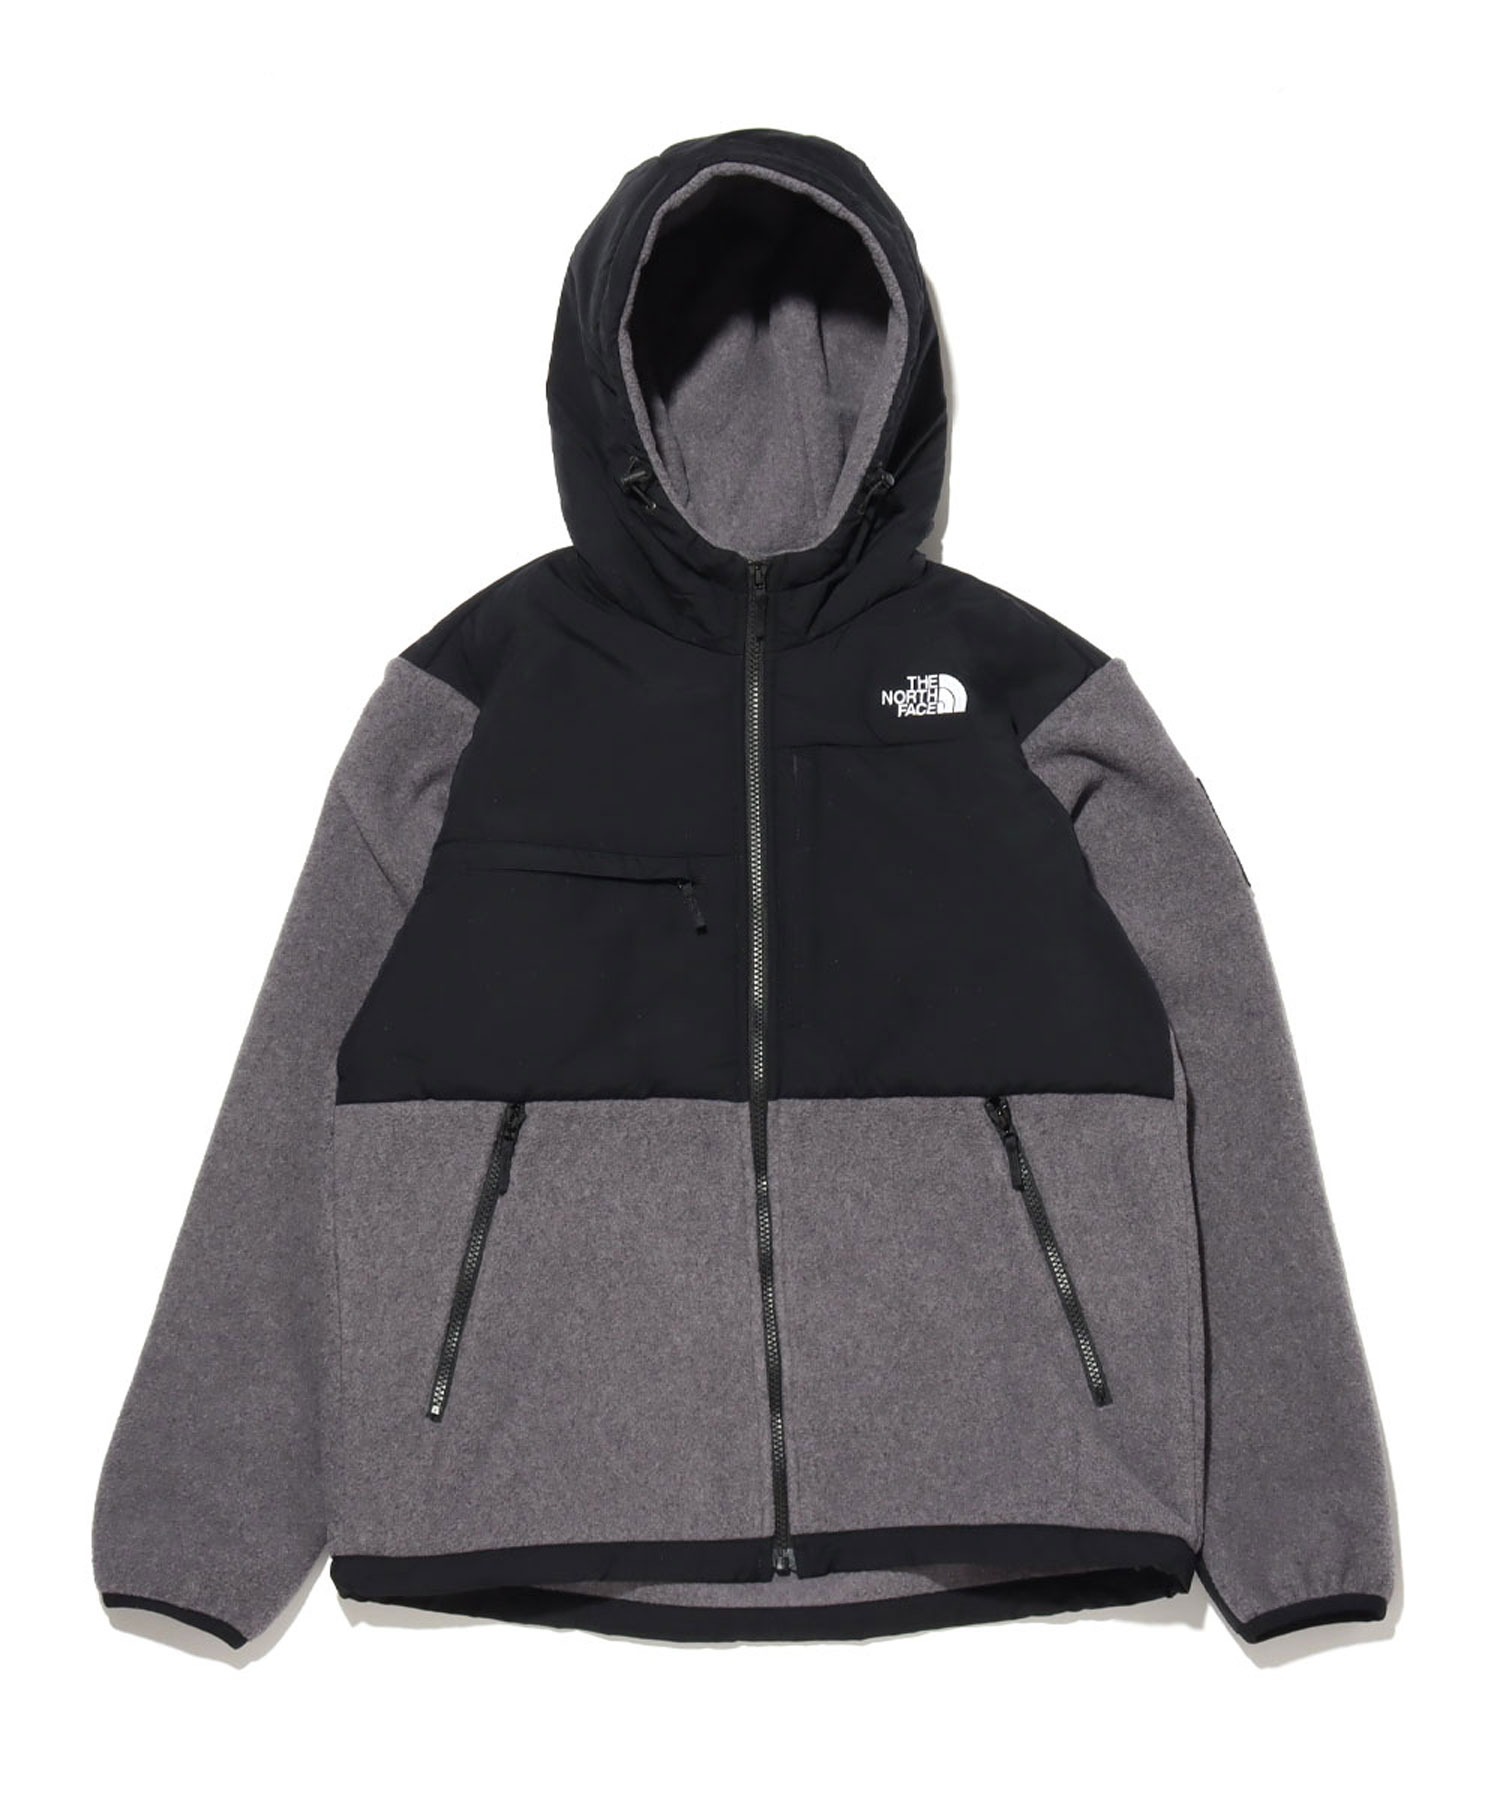 THE NORTH FACETHE FACE ザ ノース フェイス 贈答品 限定Special Price フーディー DENALI デナリ HOODIE